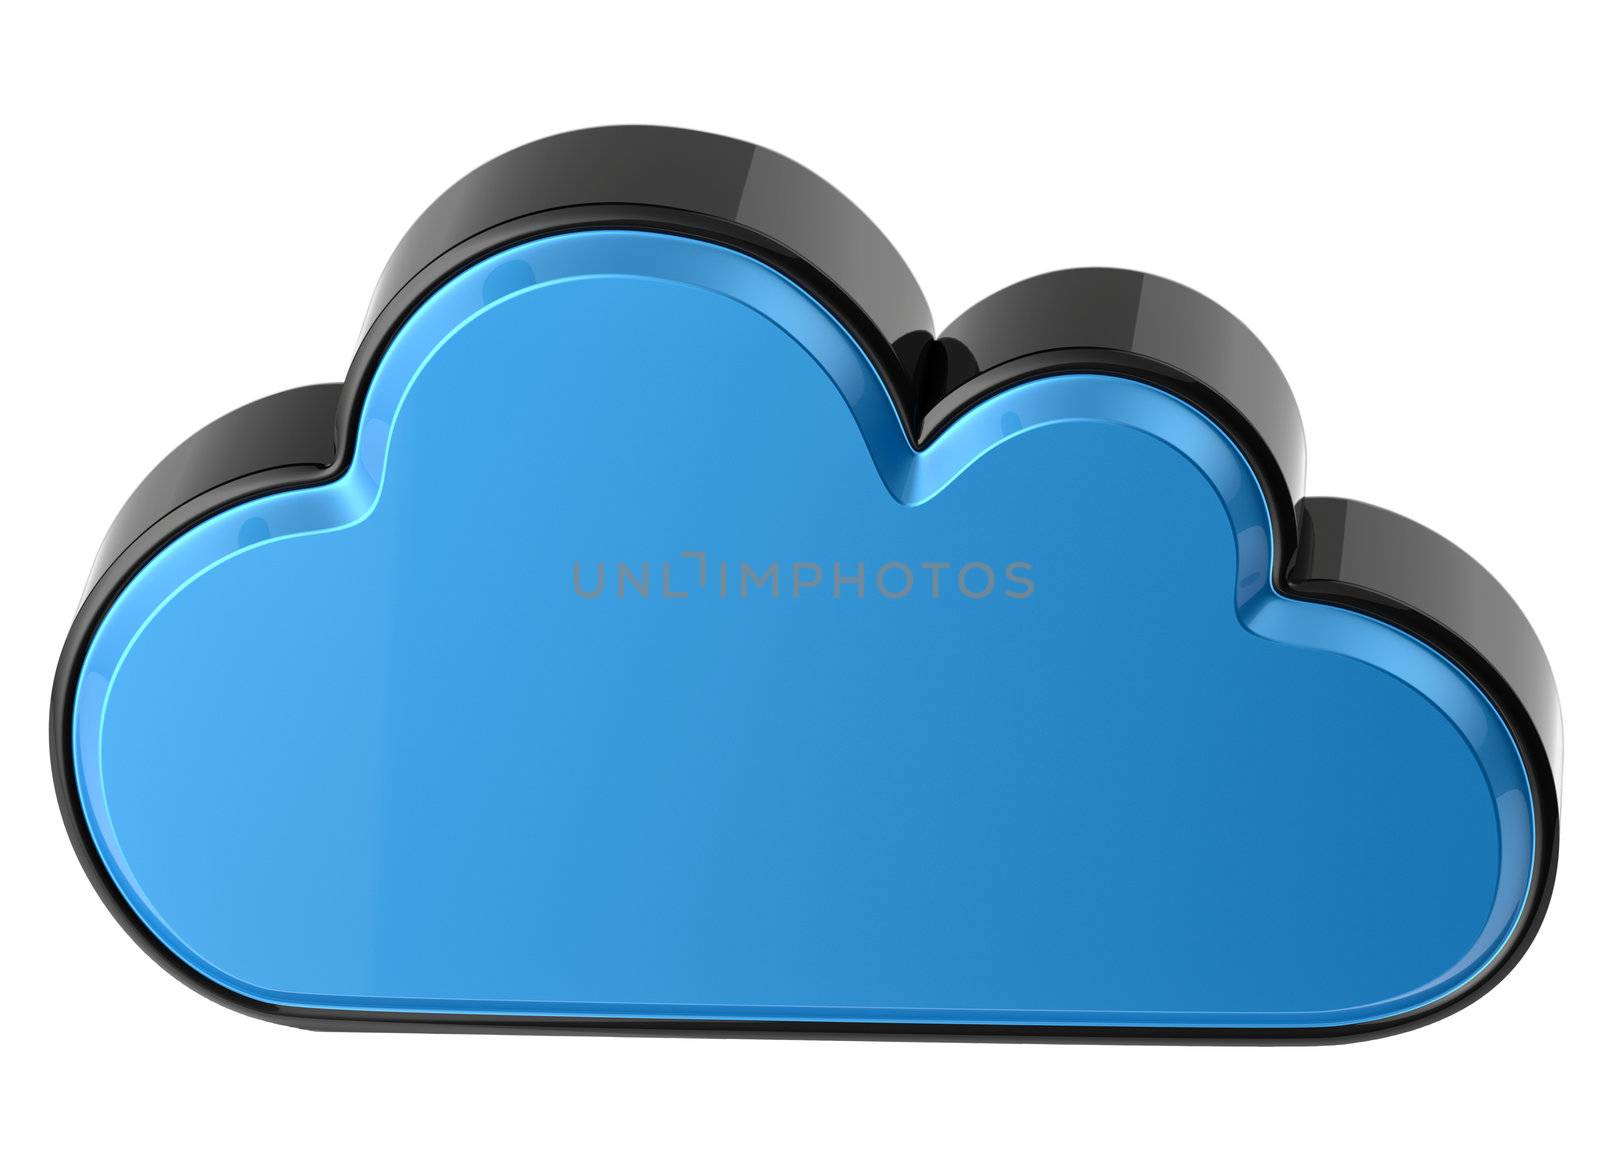 Cloud computing and storage internet security concept as is blue glossy cloud icon on white background